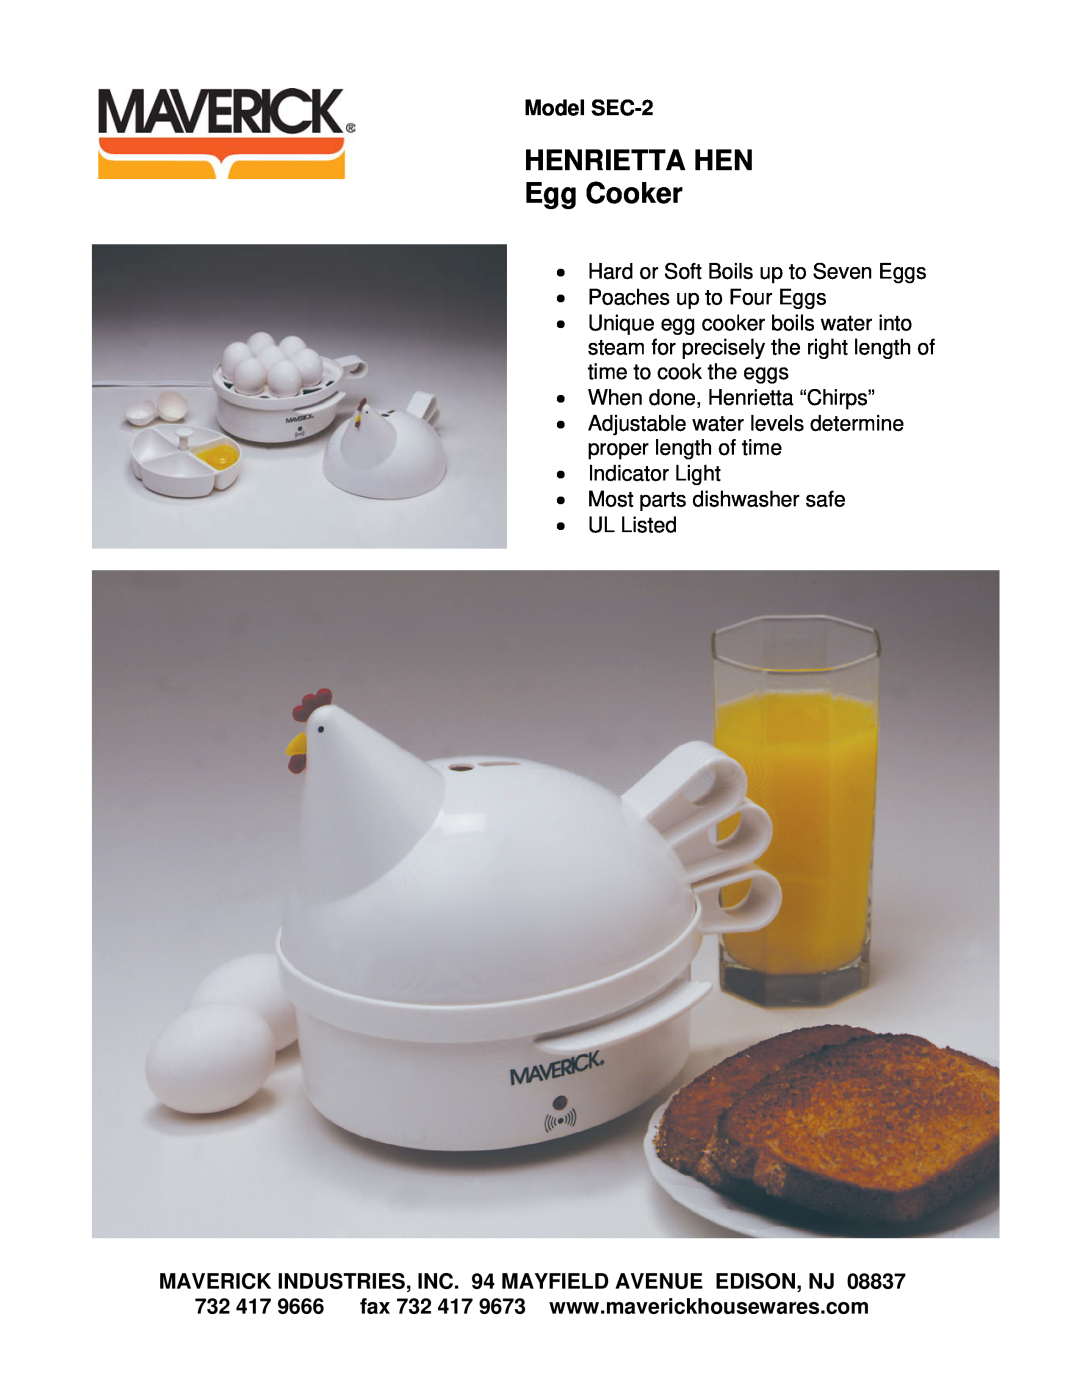 TIMEX Weather Products SEC-2 manual HENRIETTA HEN Egg Cooker 